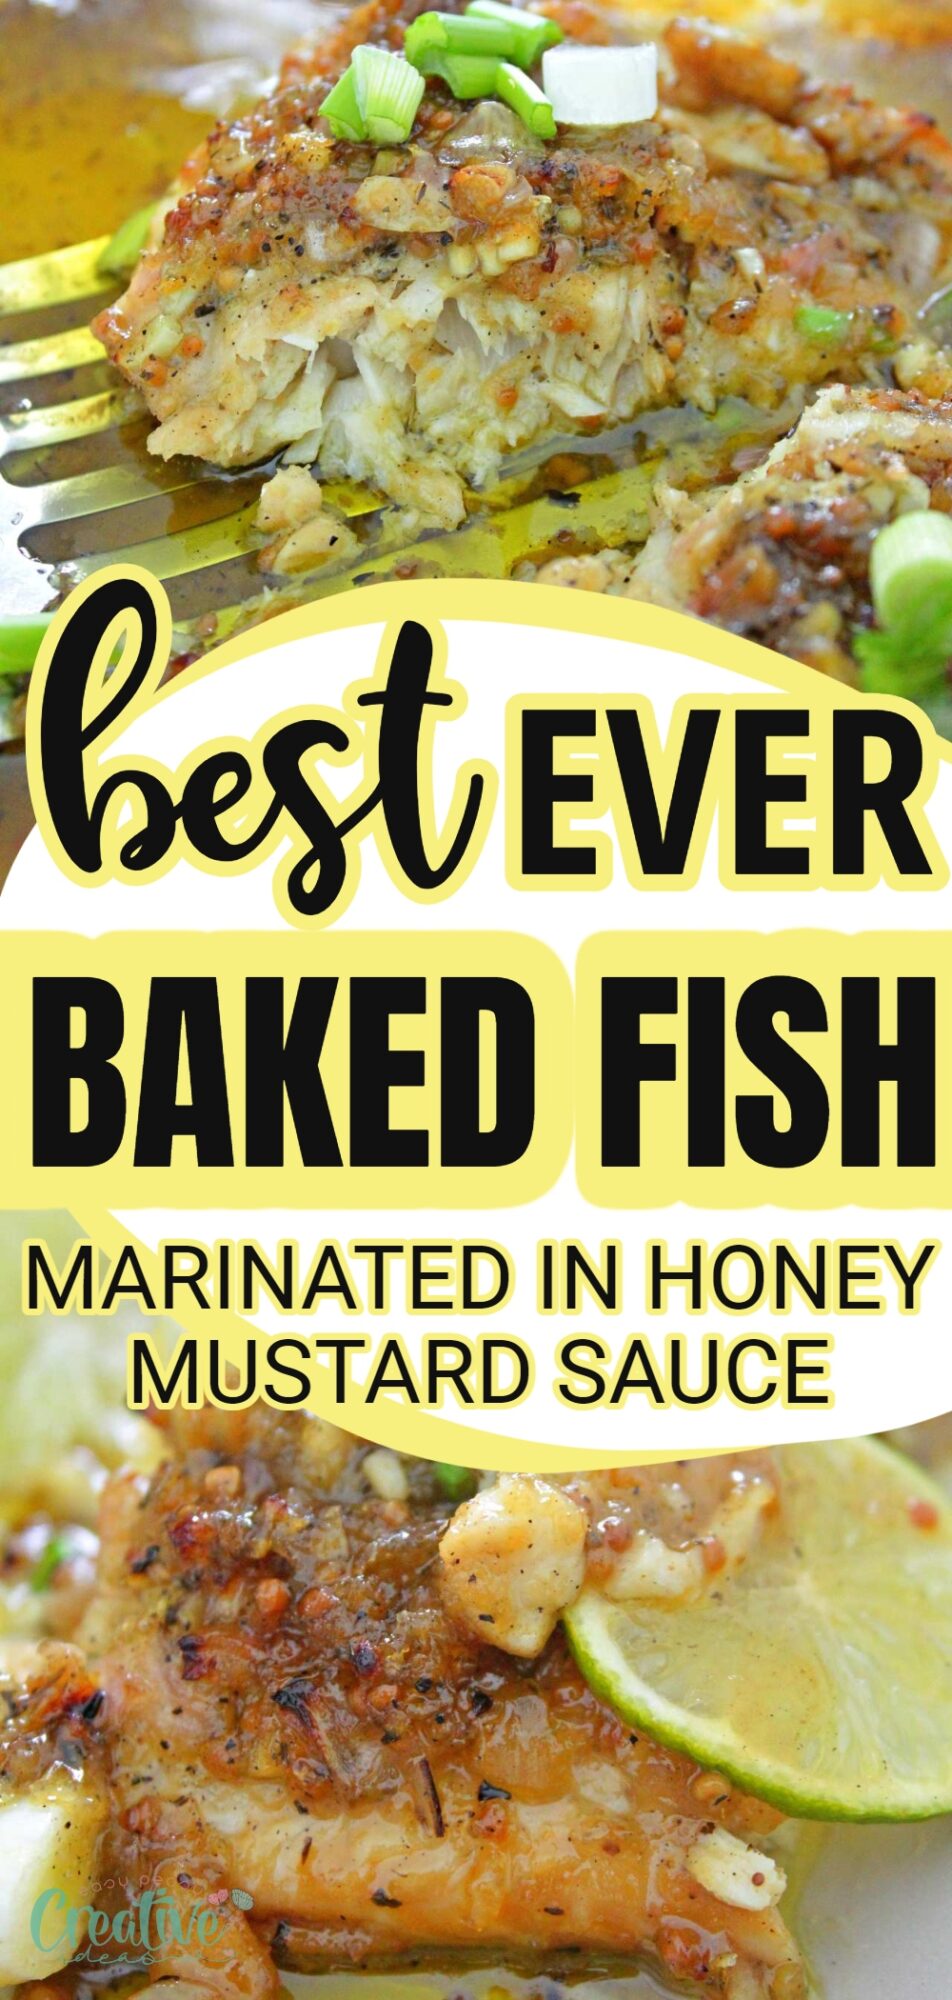 Delicious baked honey mustard fish, perfect for a quick weeknight meal. Healthy, low-carb, and full of flavor!